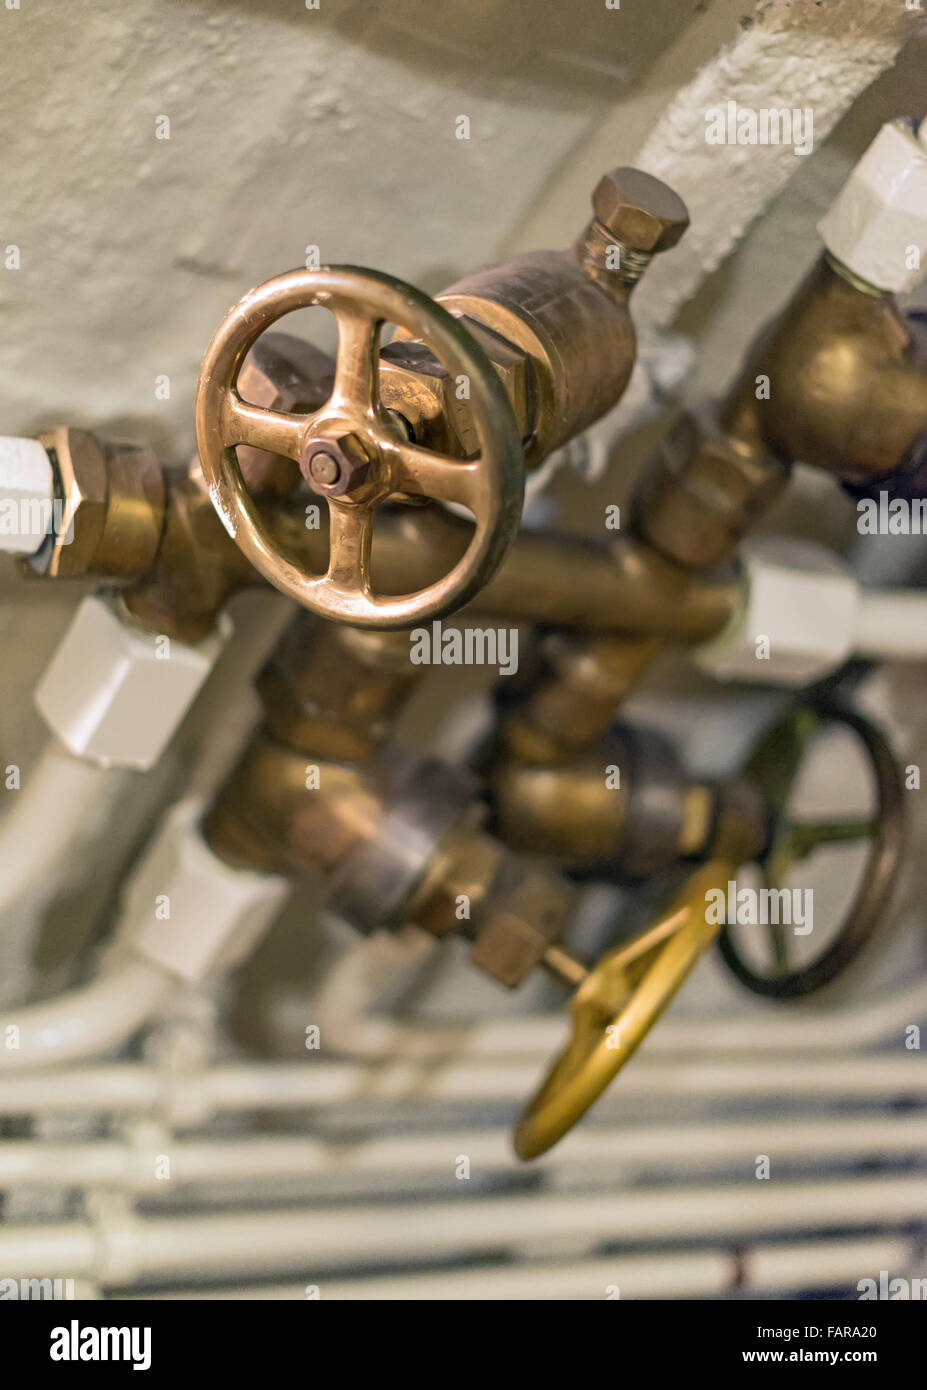 Close-up view of old valve. Stock Photo